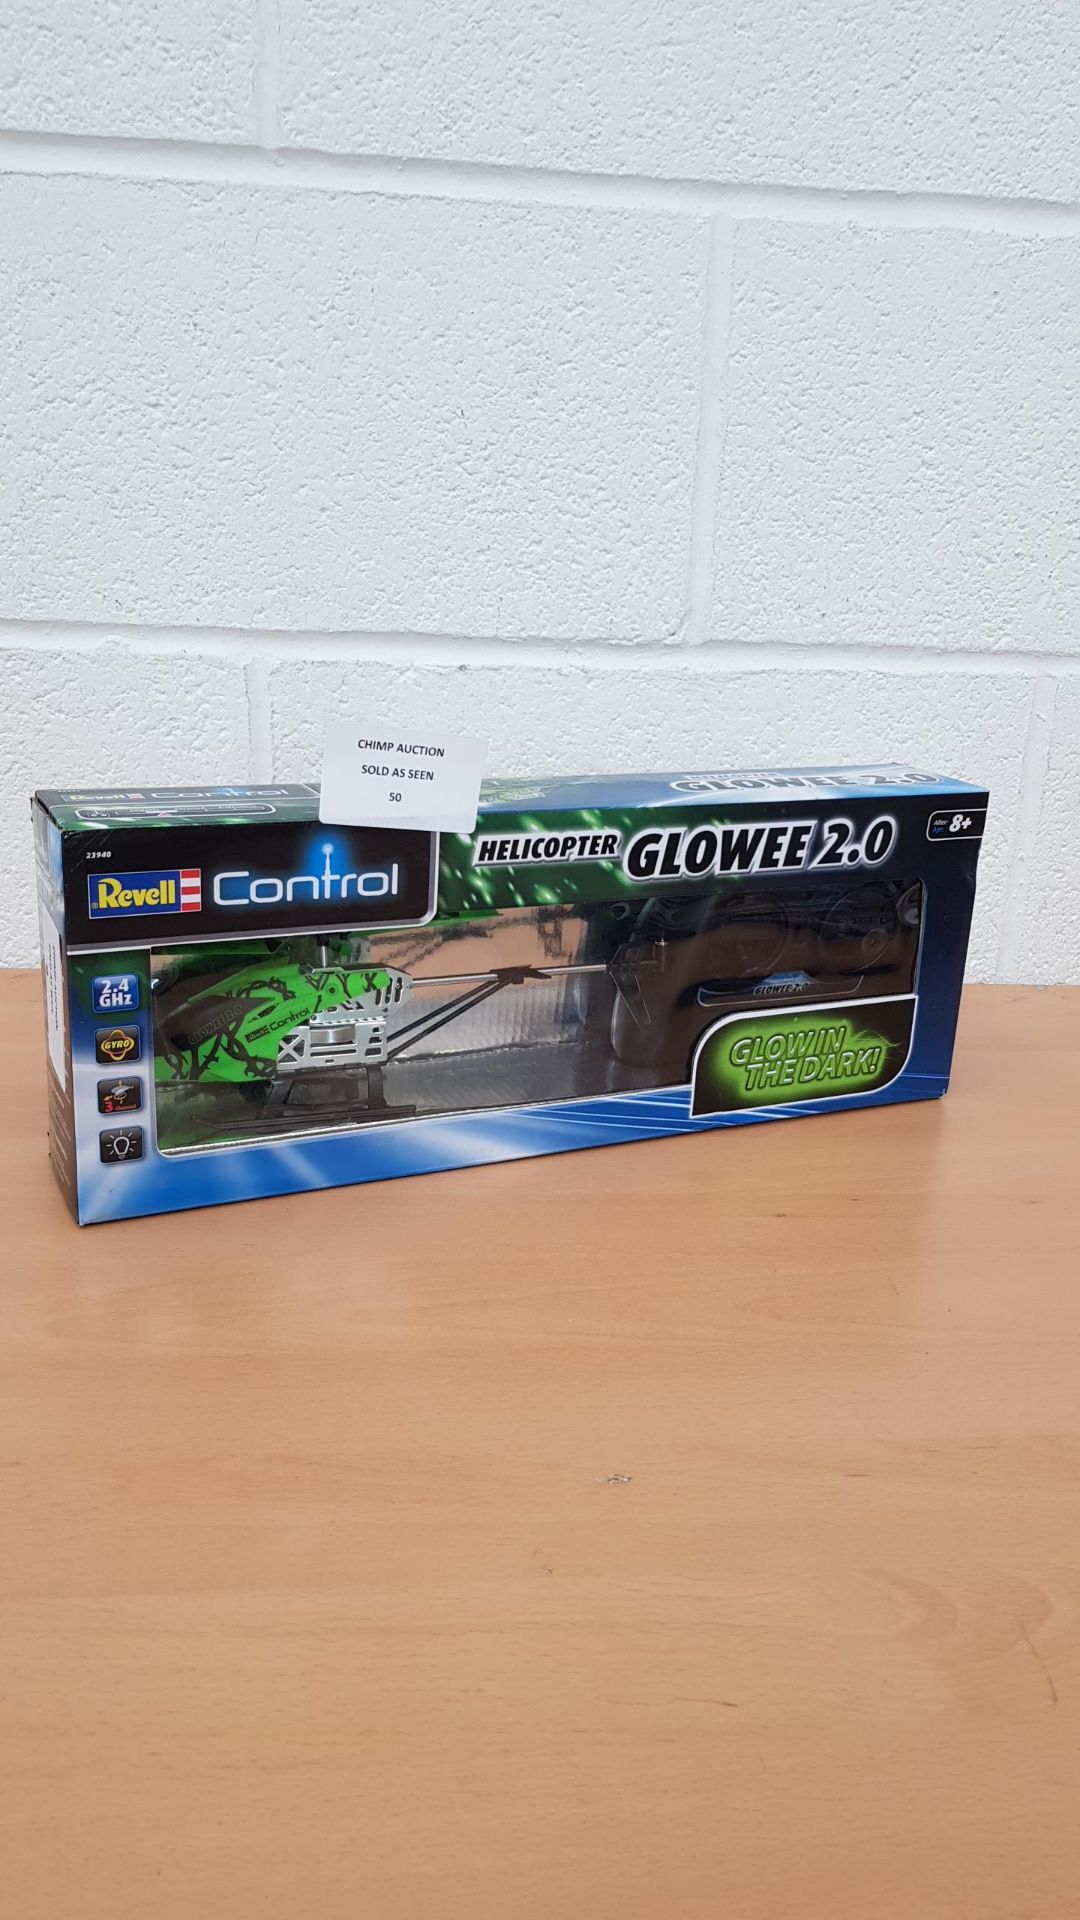 Revell Control 23940 Helicopter Glowee 2.0" RRP £39.99.